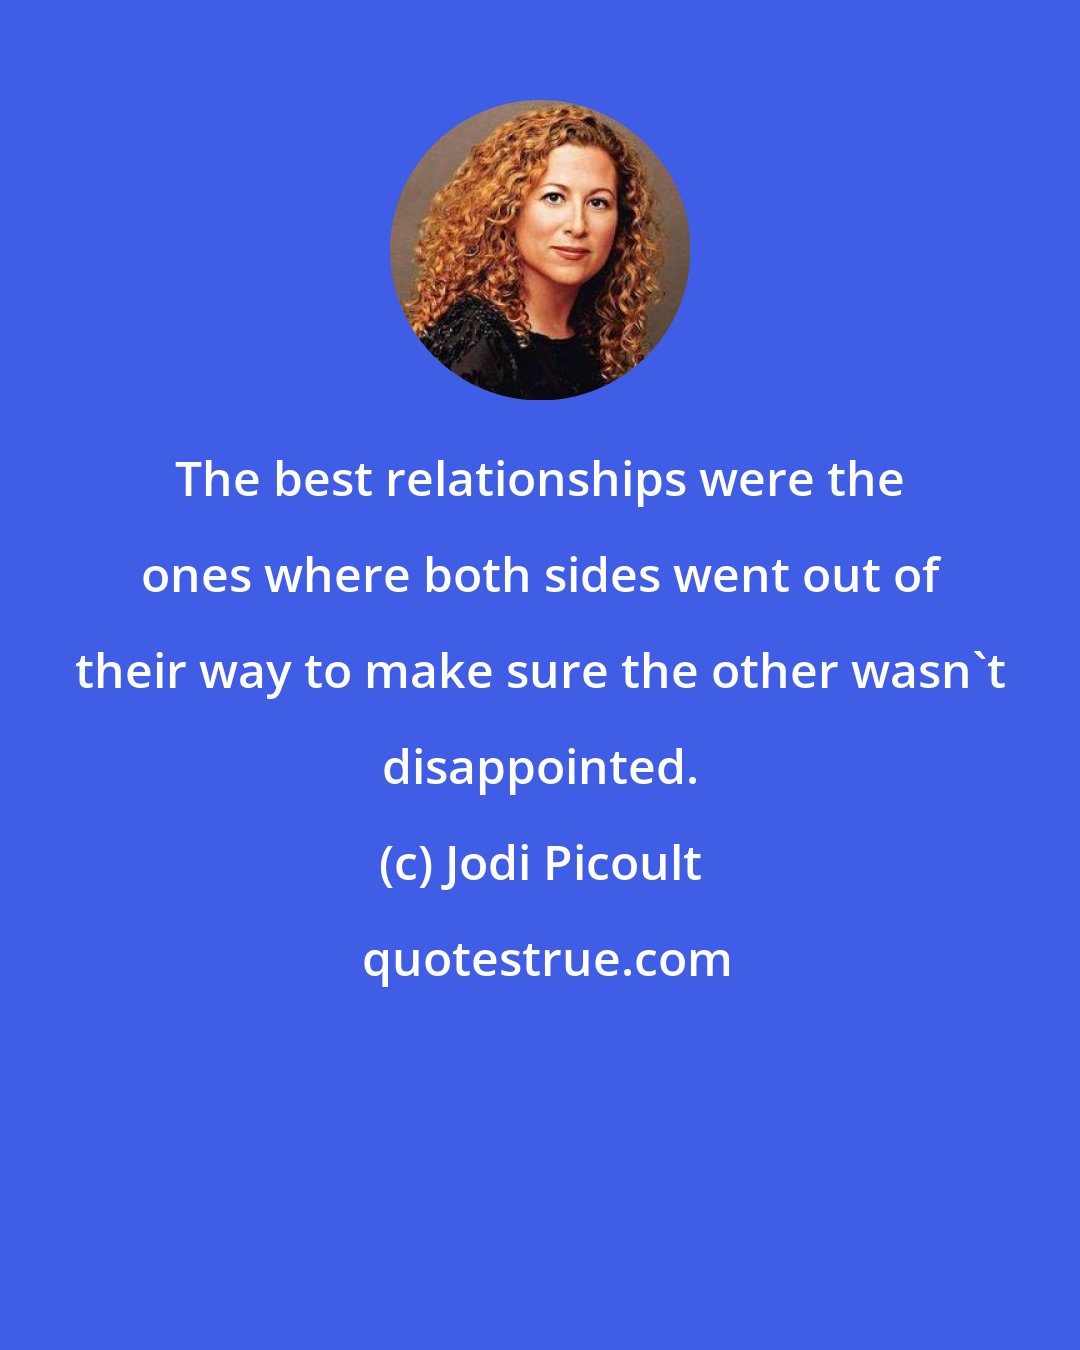 Jodi Picoult: The best relationships were the ones where both sides went out of their way to make sure the other wasn't disappointed.